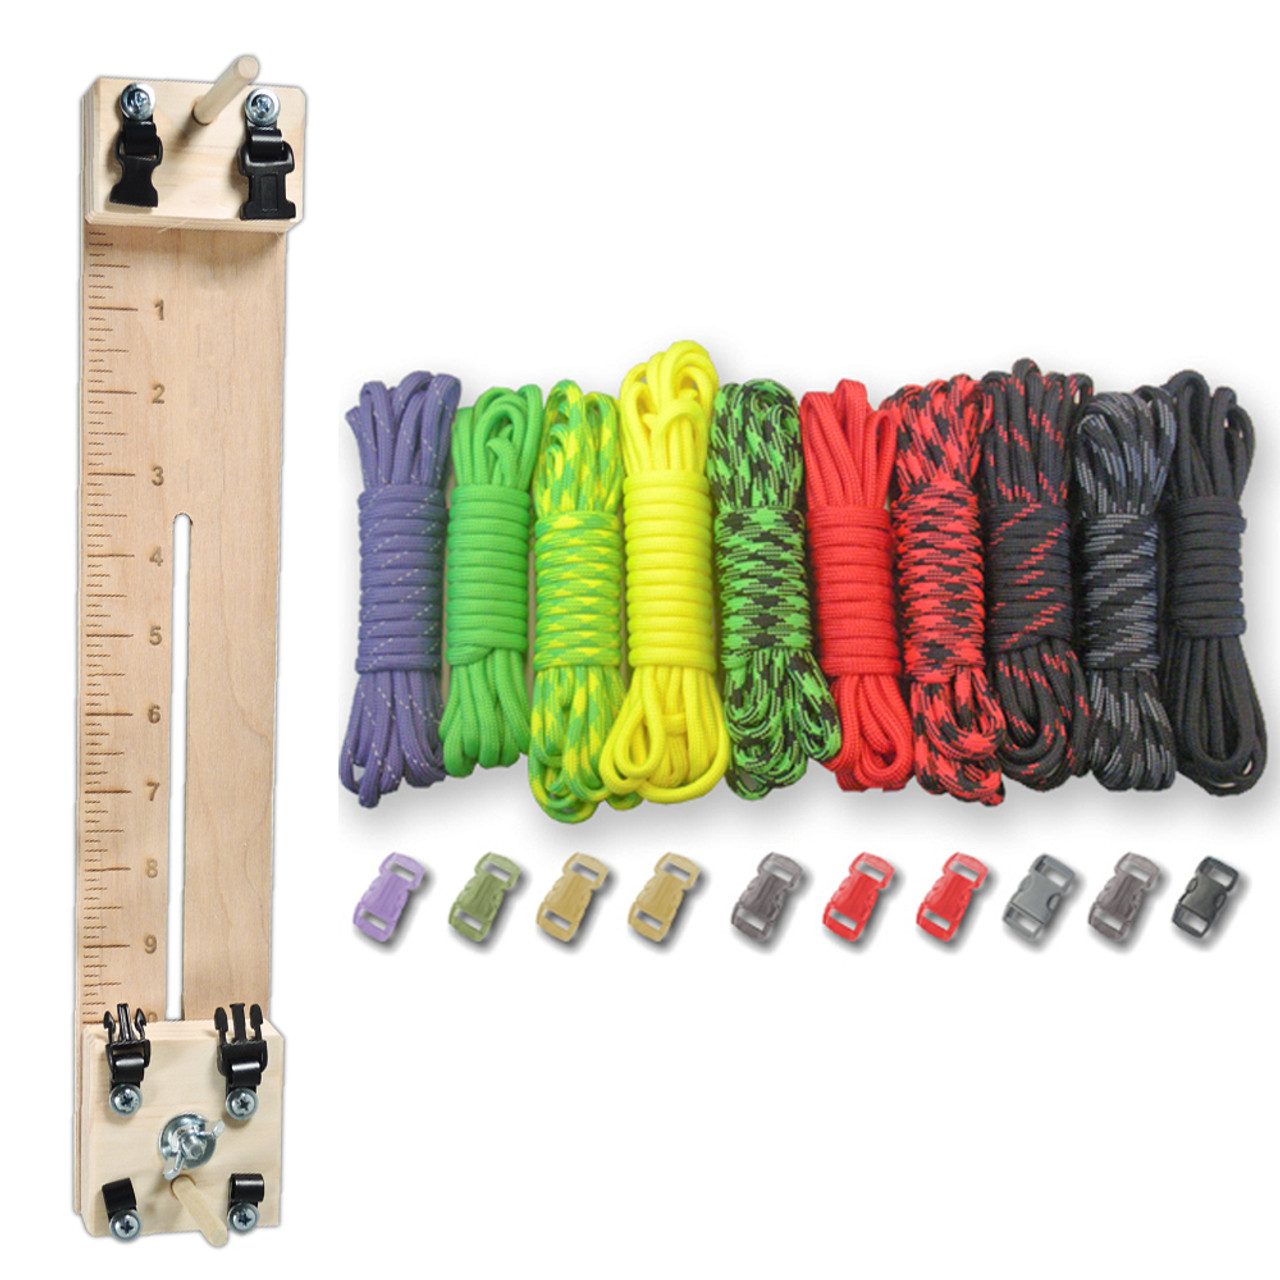 Paracord Combo Crafting Kit with a 10 Pocket Pro Jig - Zombie